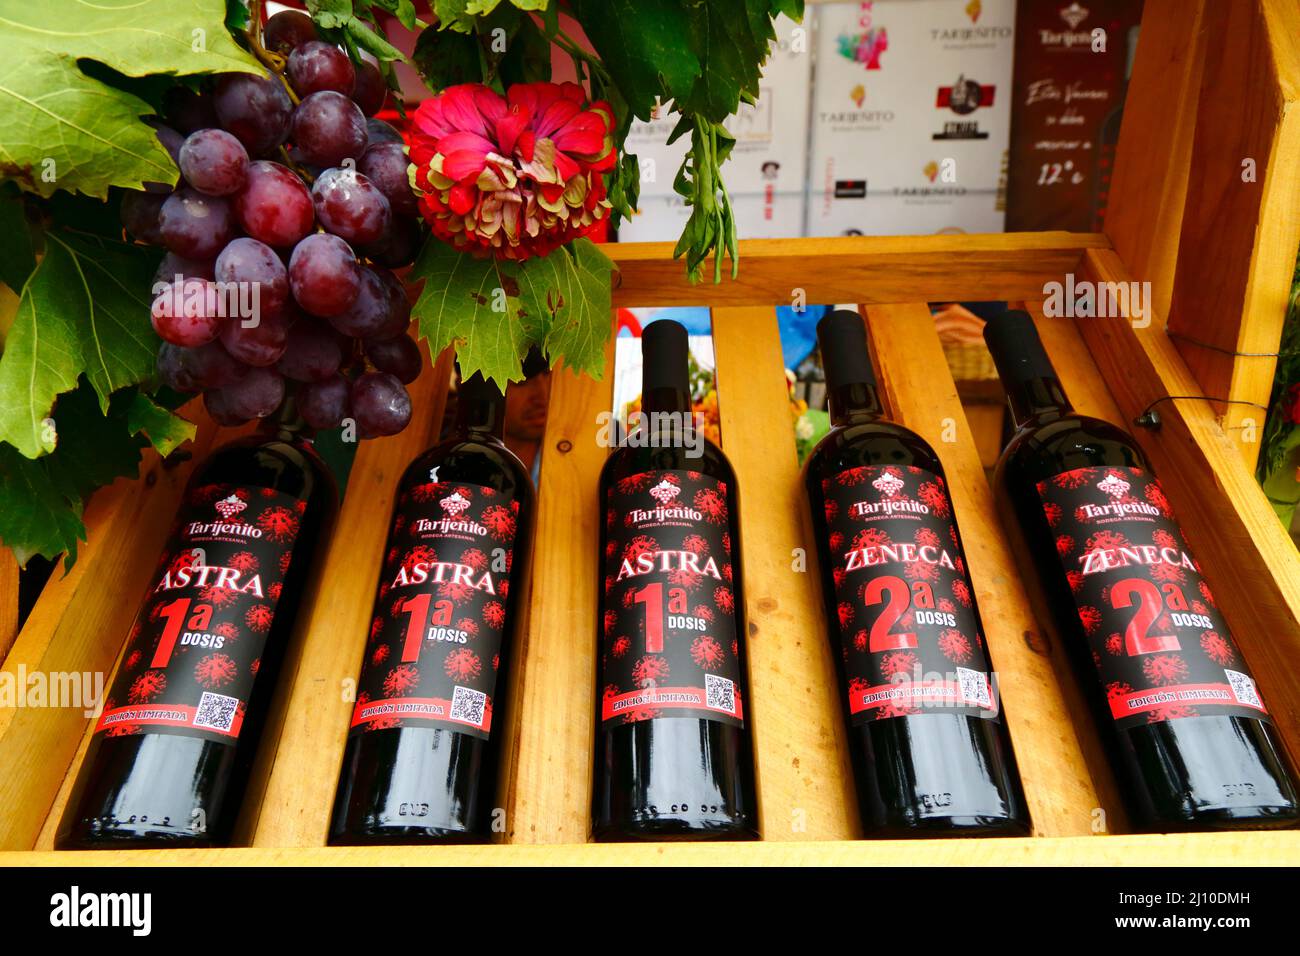 Sunday 20th March 2022: Covid vaccine themed wines 'Astra 1st dose' and 'Zeneca 2nd dose' by the artesanal winery Tarijeñito on display at the Vendemia wine festival in Uriondo, Concepcion Valley, near Tarija, Bolivia. This is the first year the festival, which takes place after the grape harvest, has been held since the covid-19 pandemic started in March 2020. The Concepcion Valley near Tarija is the largest grape growing and wine making region in Bolivia. Stock Photo